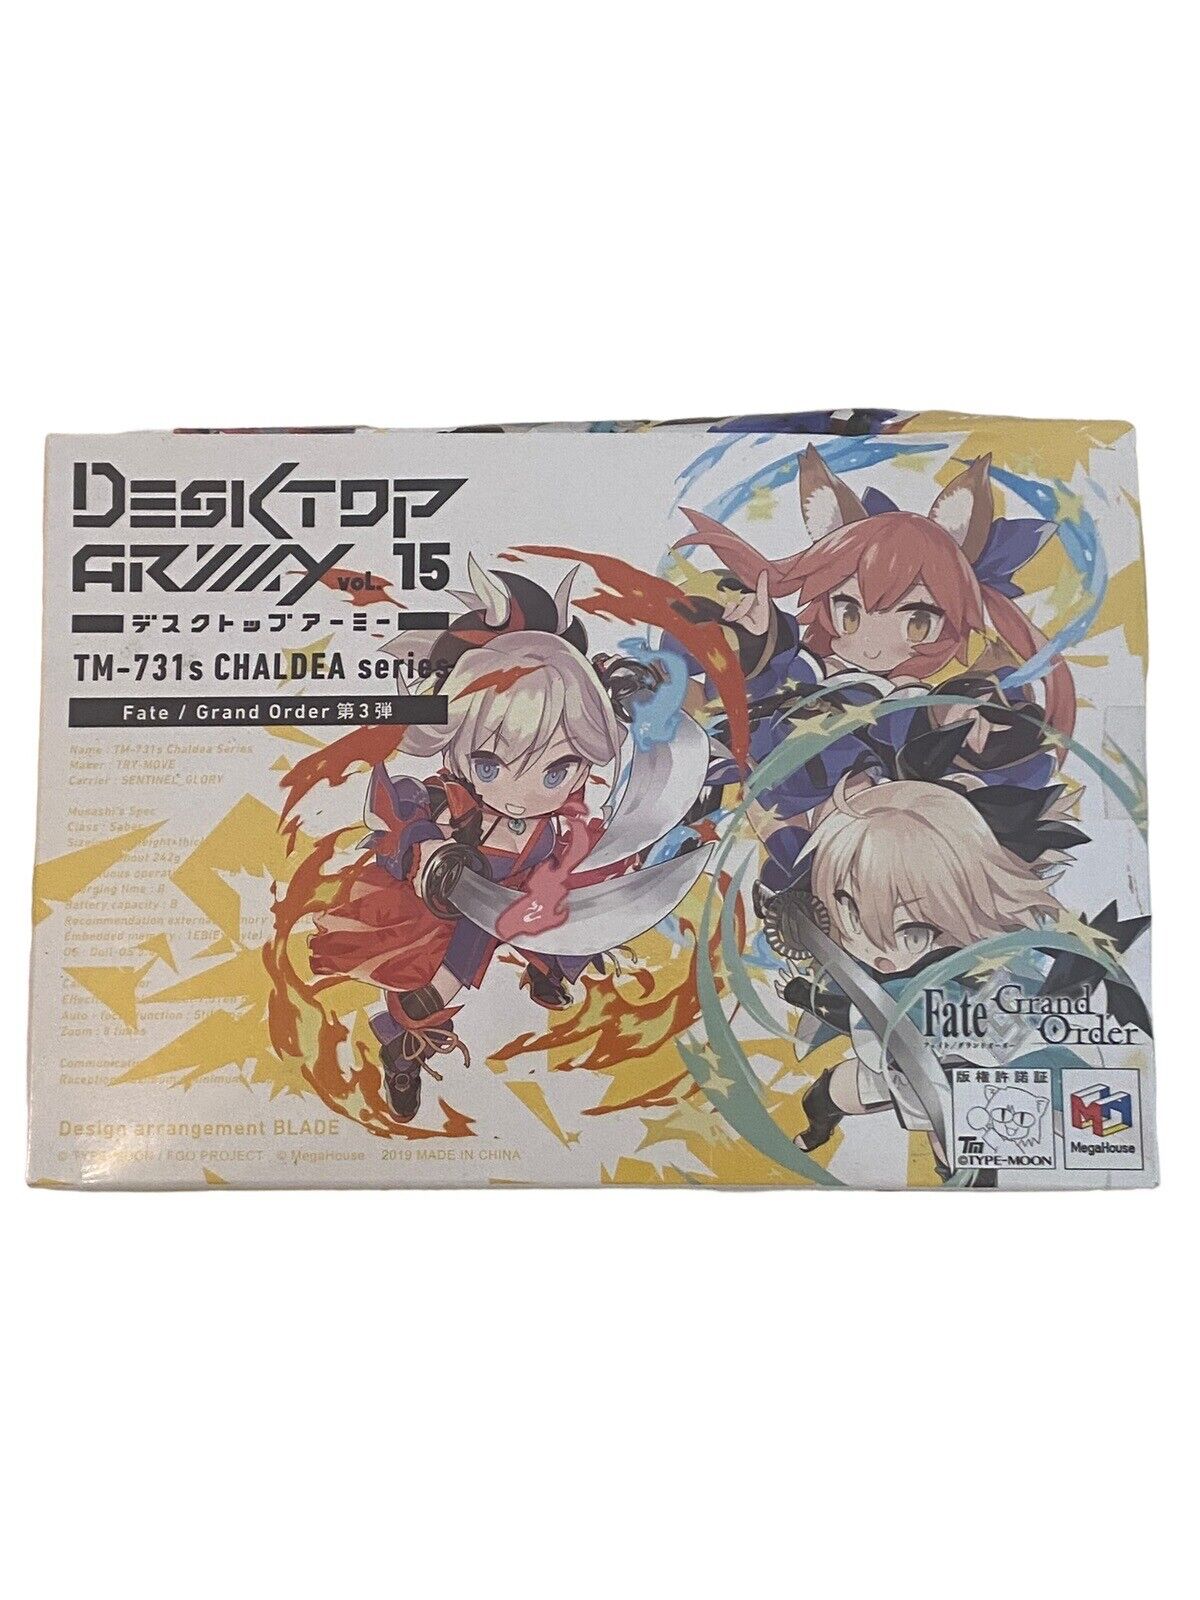 Desktop Army Fate/Grand Order Vol.3 BOX Action Figure MegaHouse Japan Sealed New